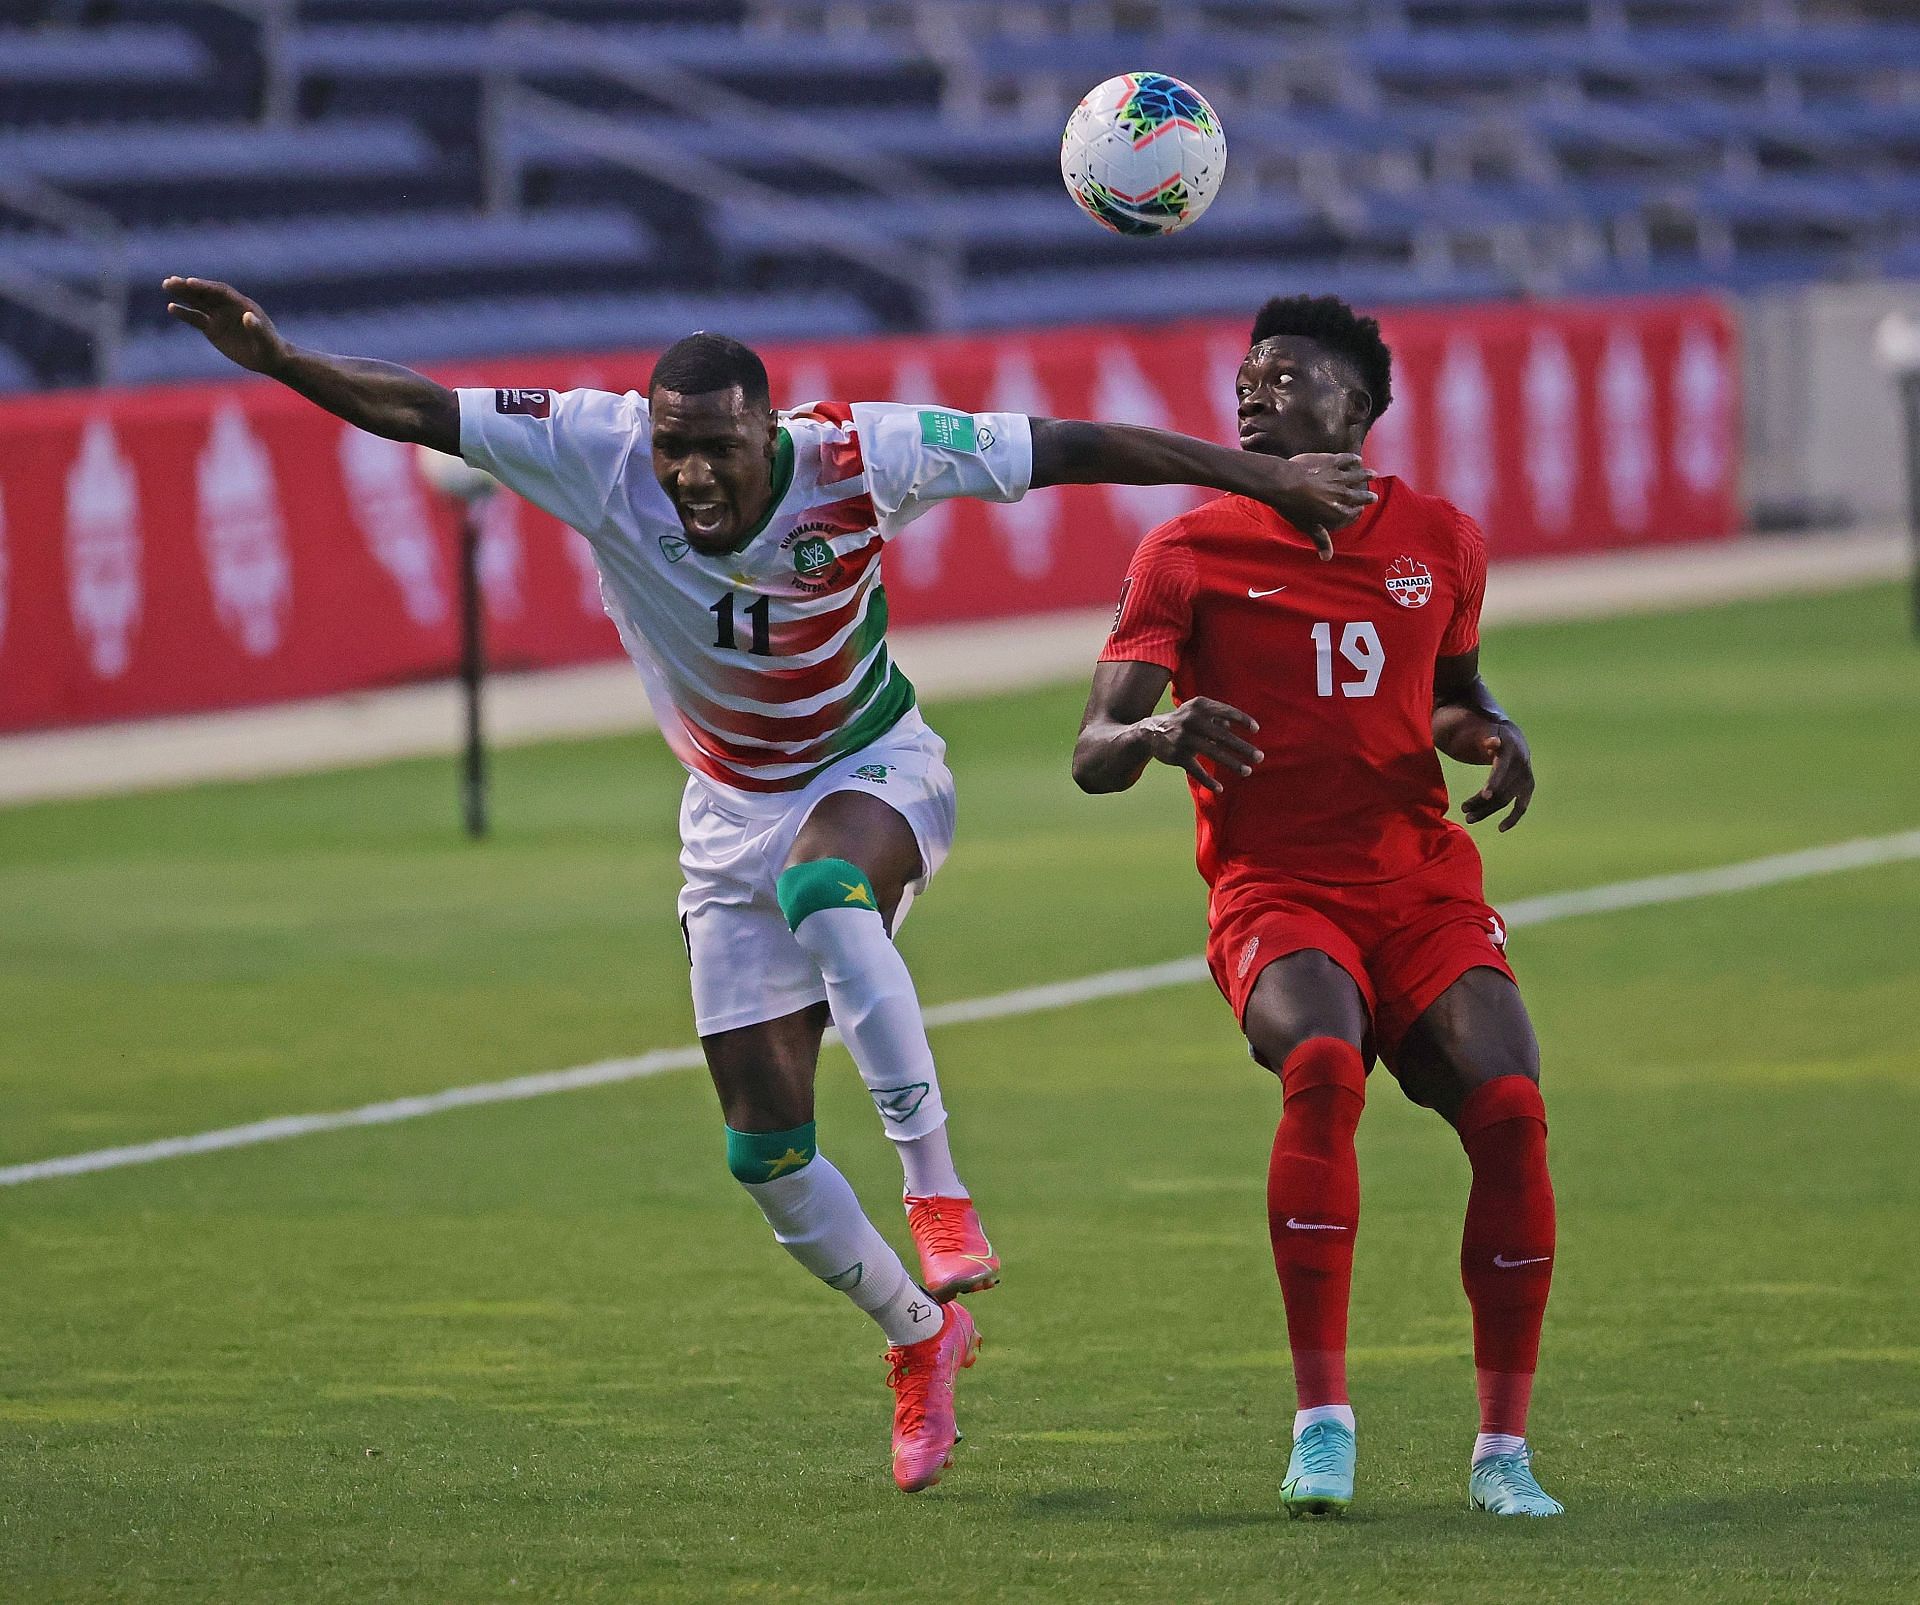 Suriname will face Barbados on Friday